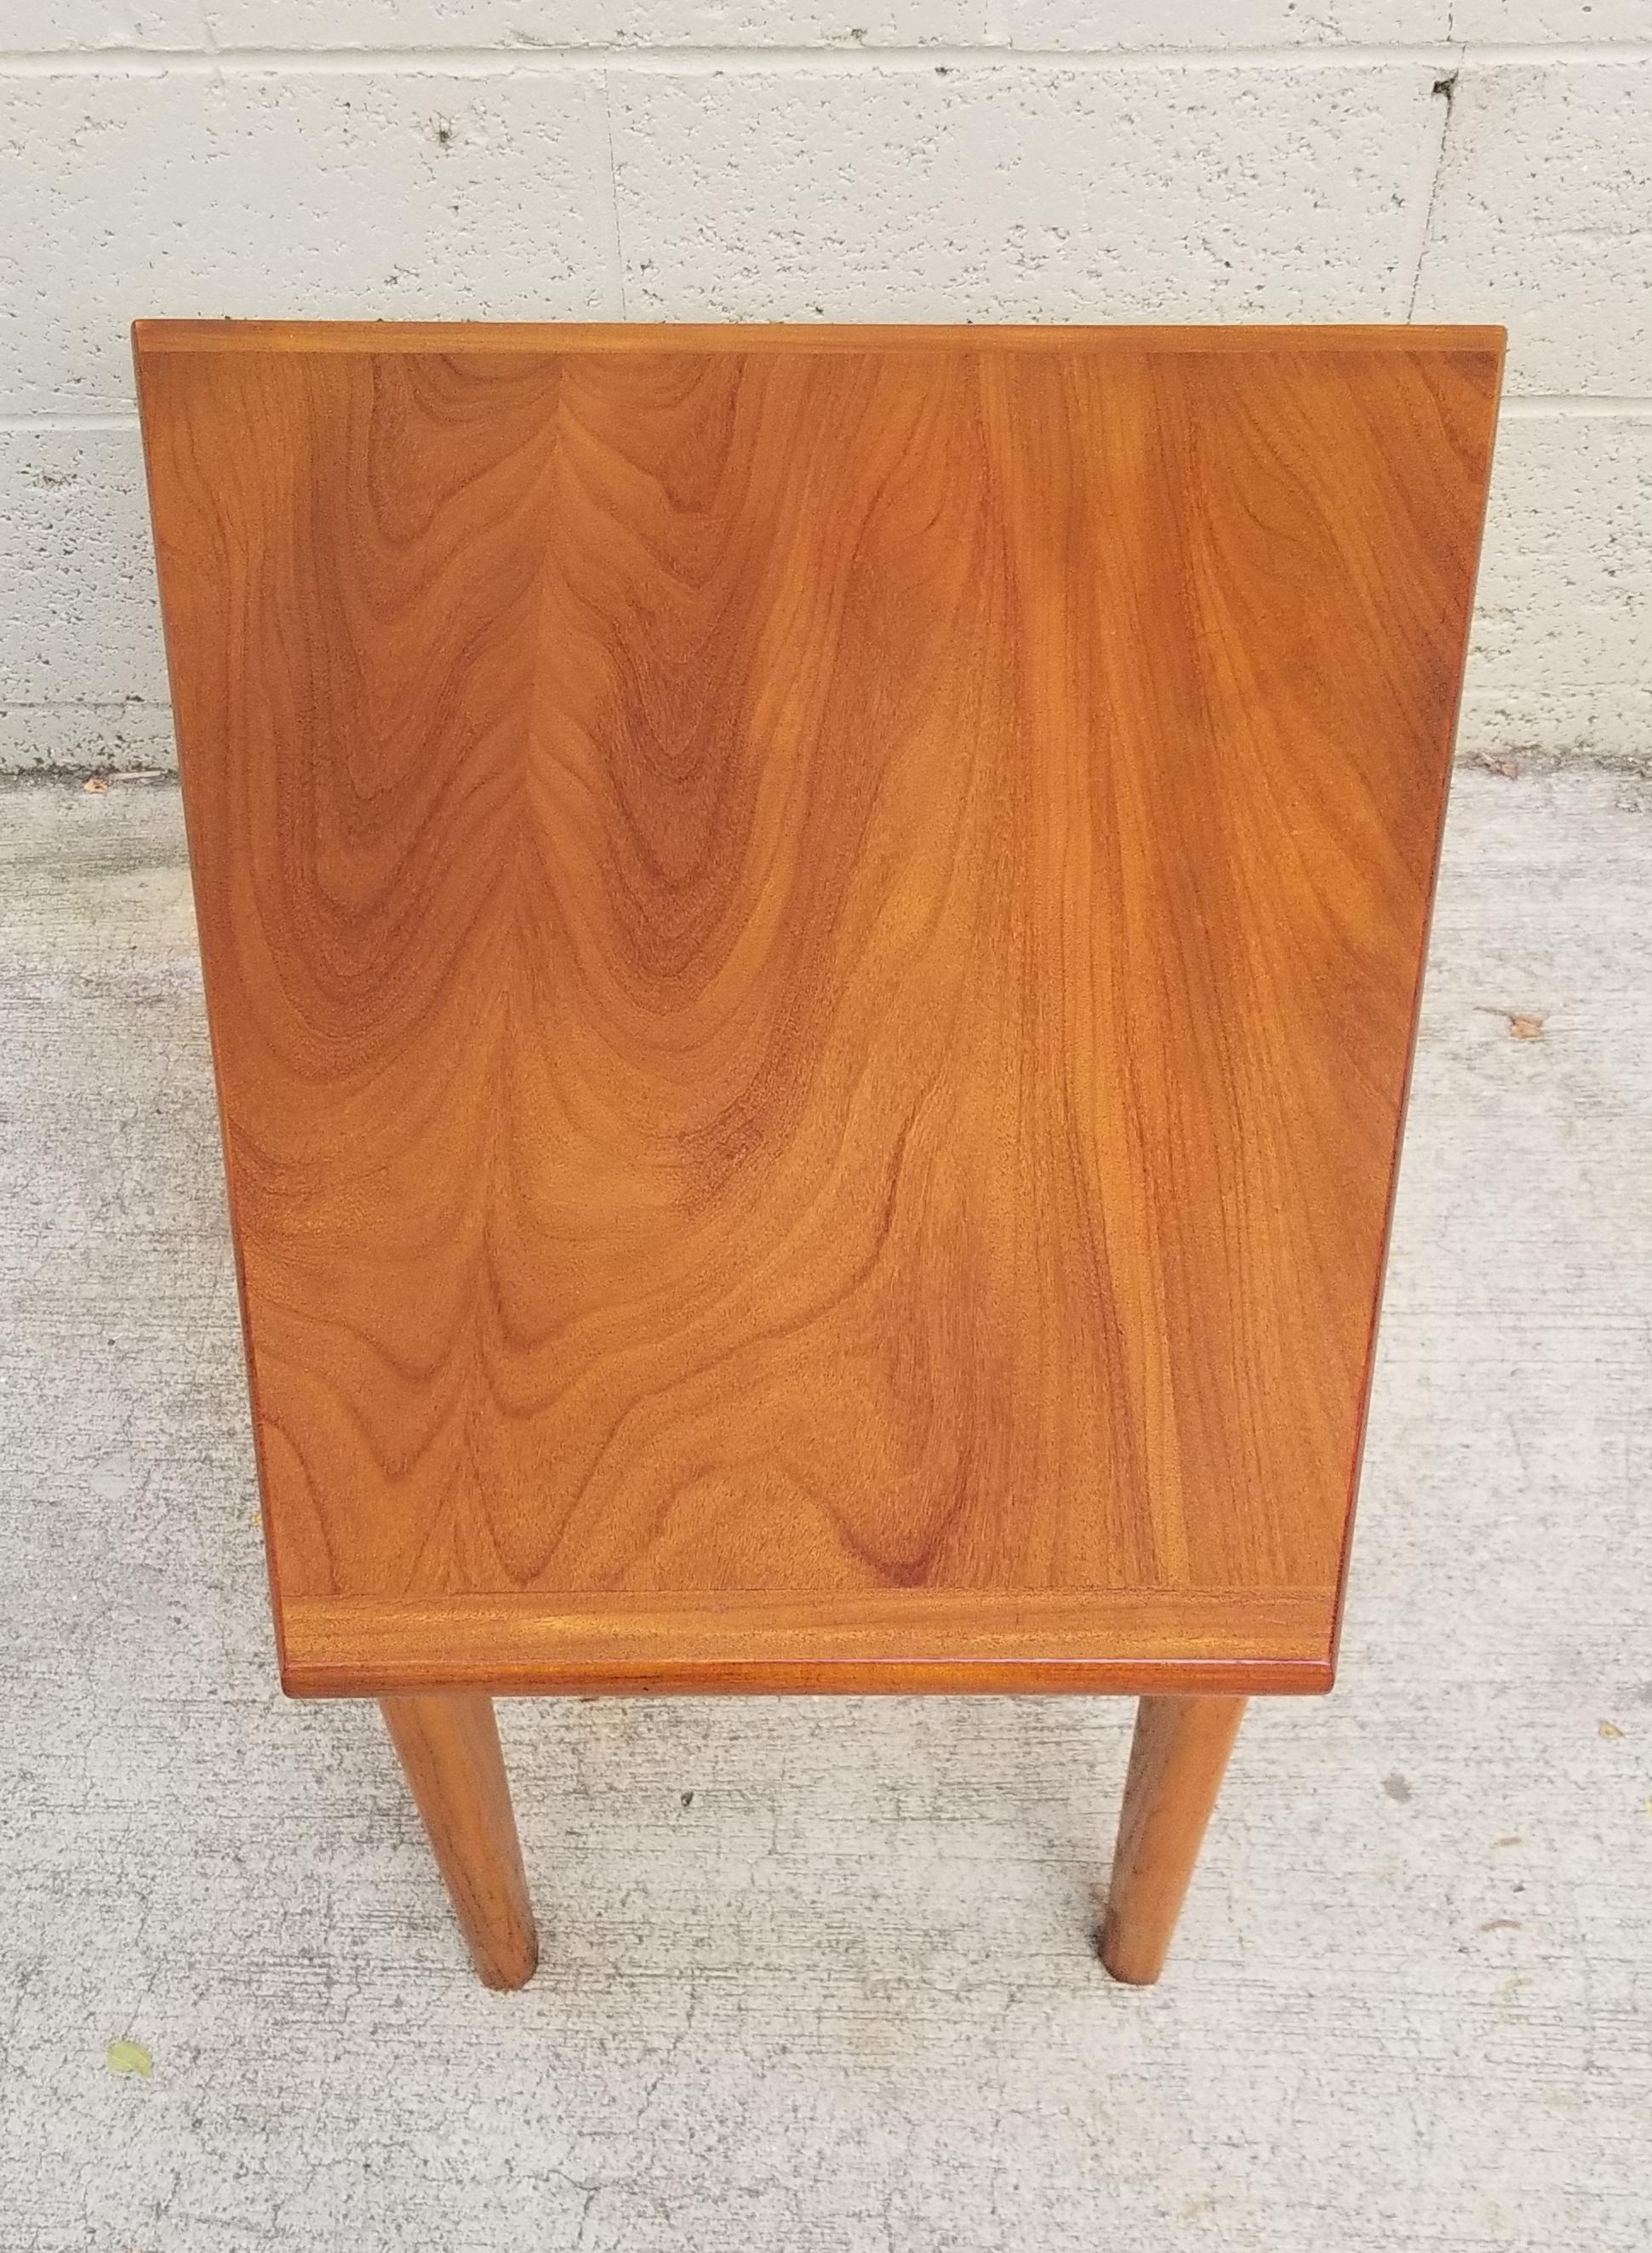 A Mid-Century Modern trapezoid end table with bold, finger-joint construction. Quality materials and workmanship. Notice exceptional wood grain to top surface. Excellent vintage condition with original finish. 

Front width measures 11.88 inches.